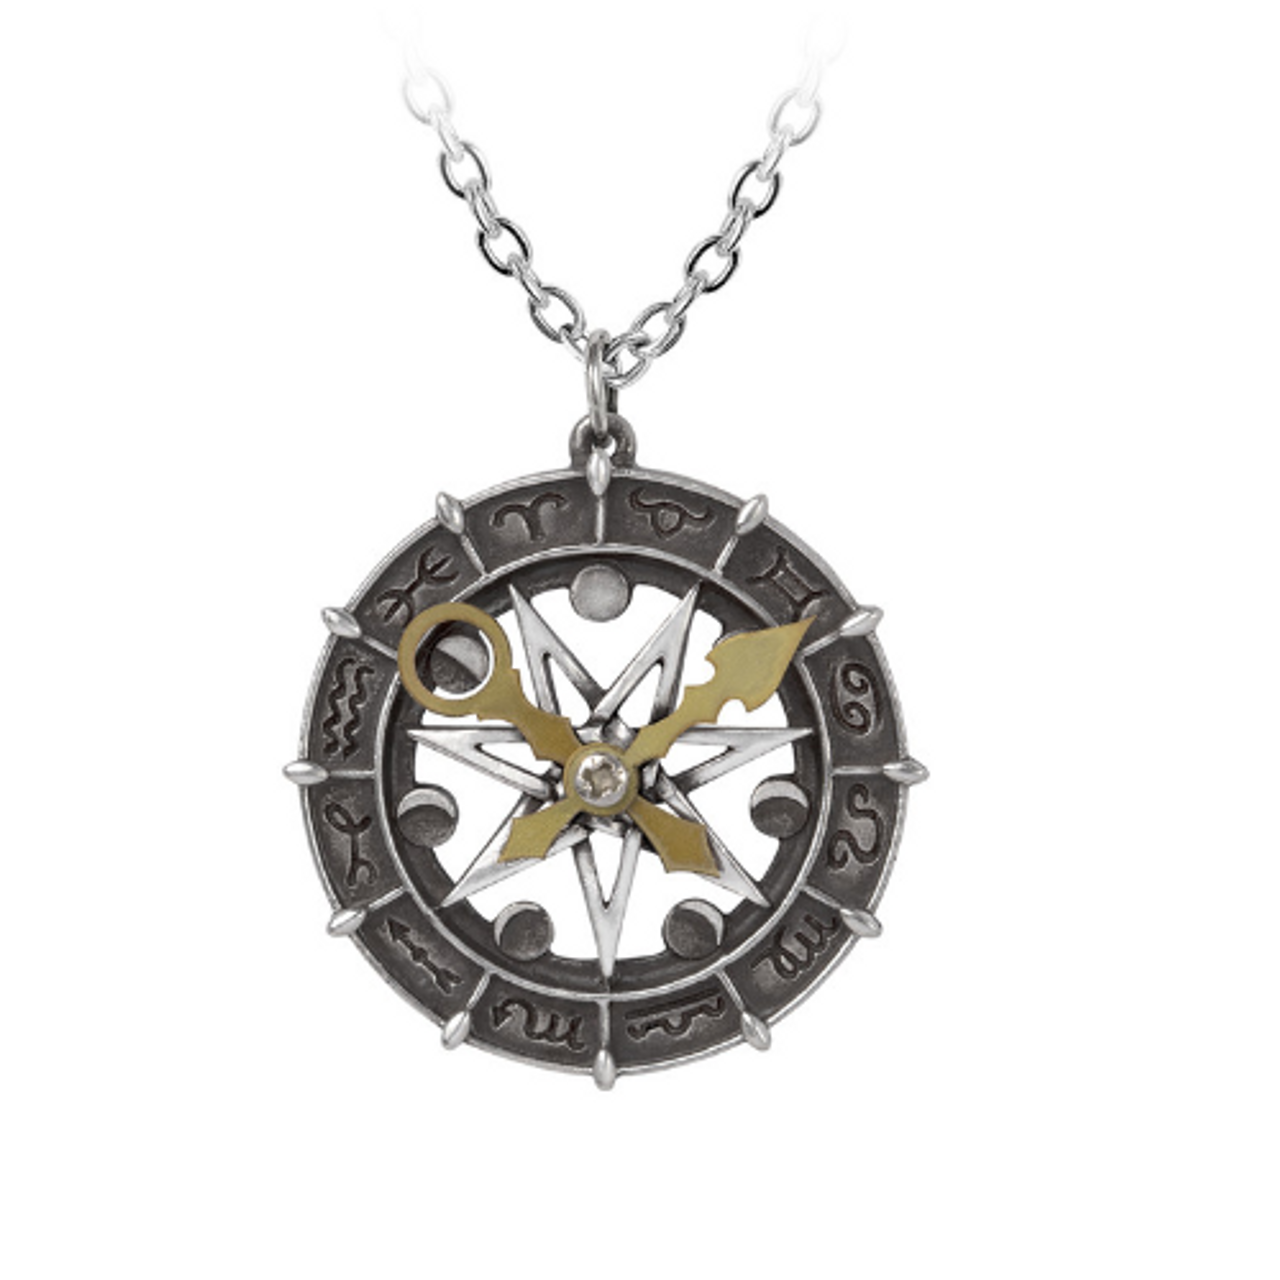 Astro-lunial Compass Pendant by Alchemy